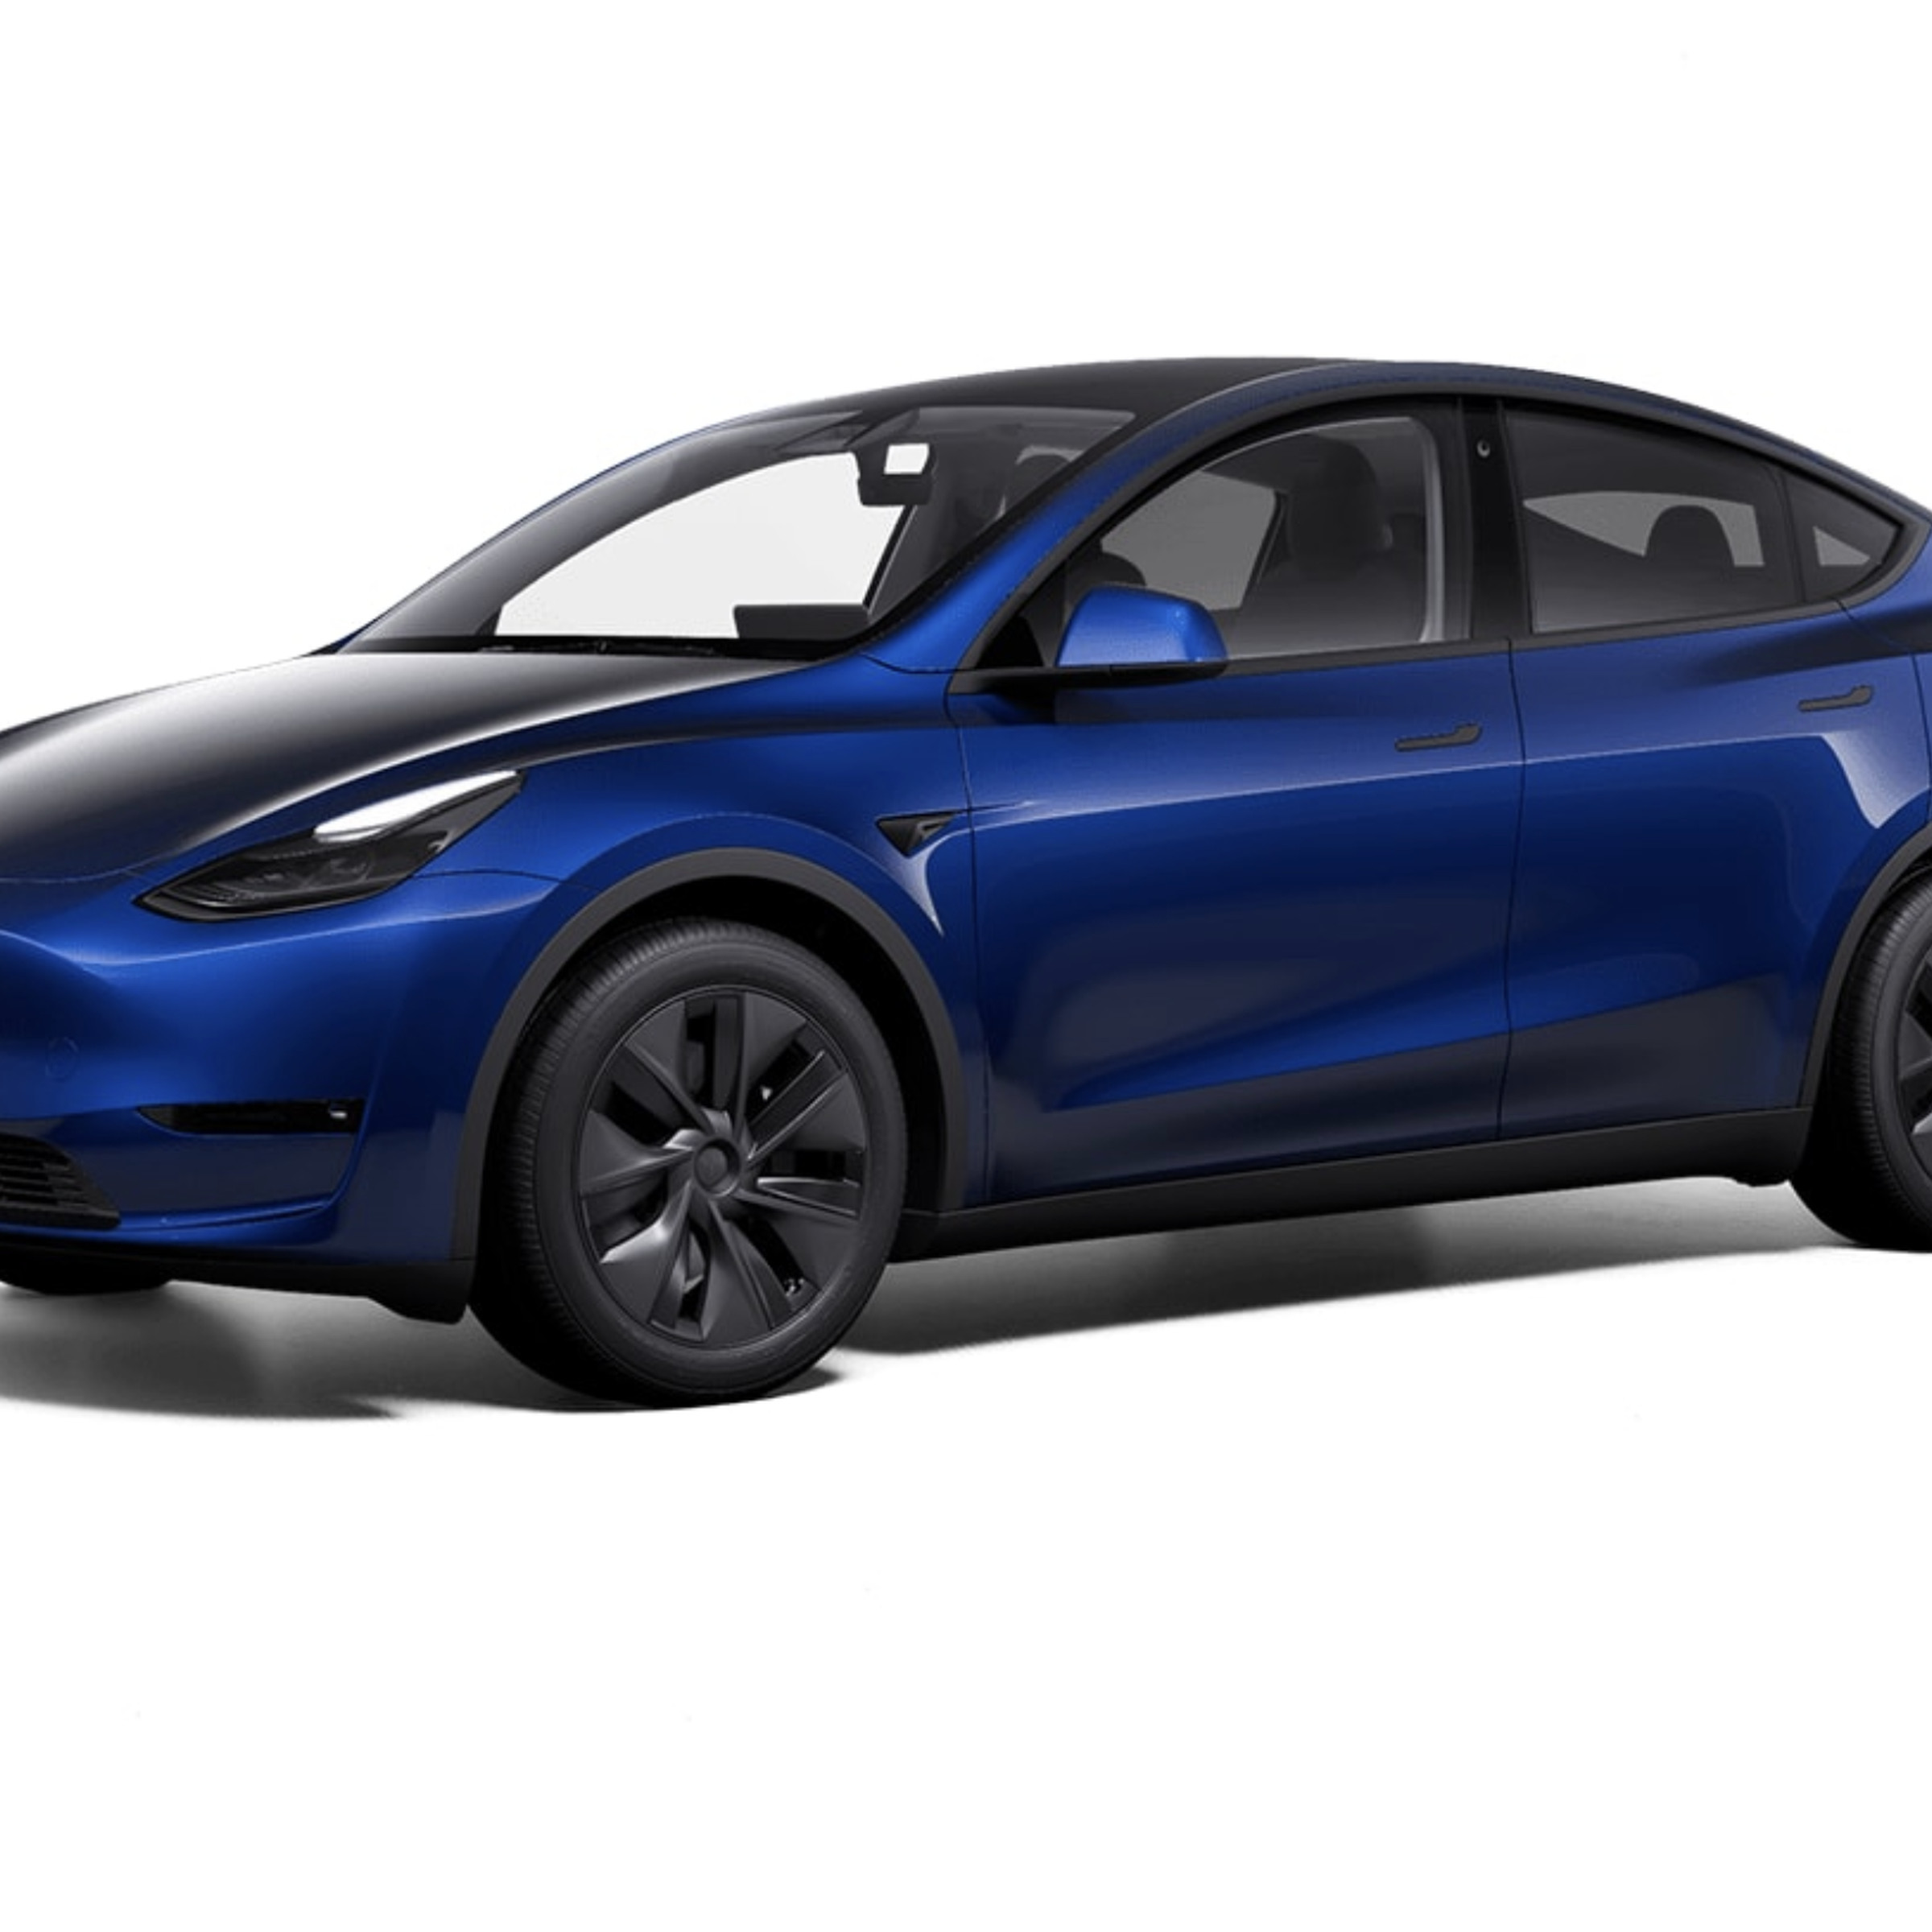 The new Model Y in blue, in a near-three-quarter view.